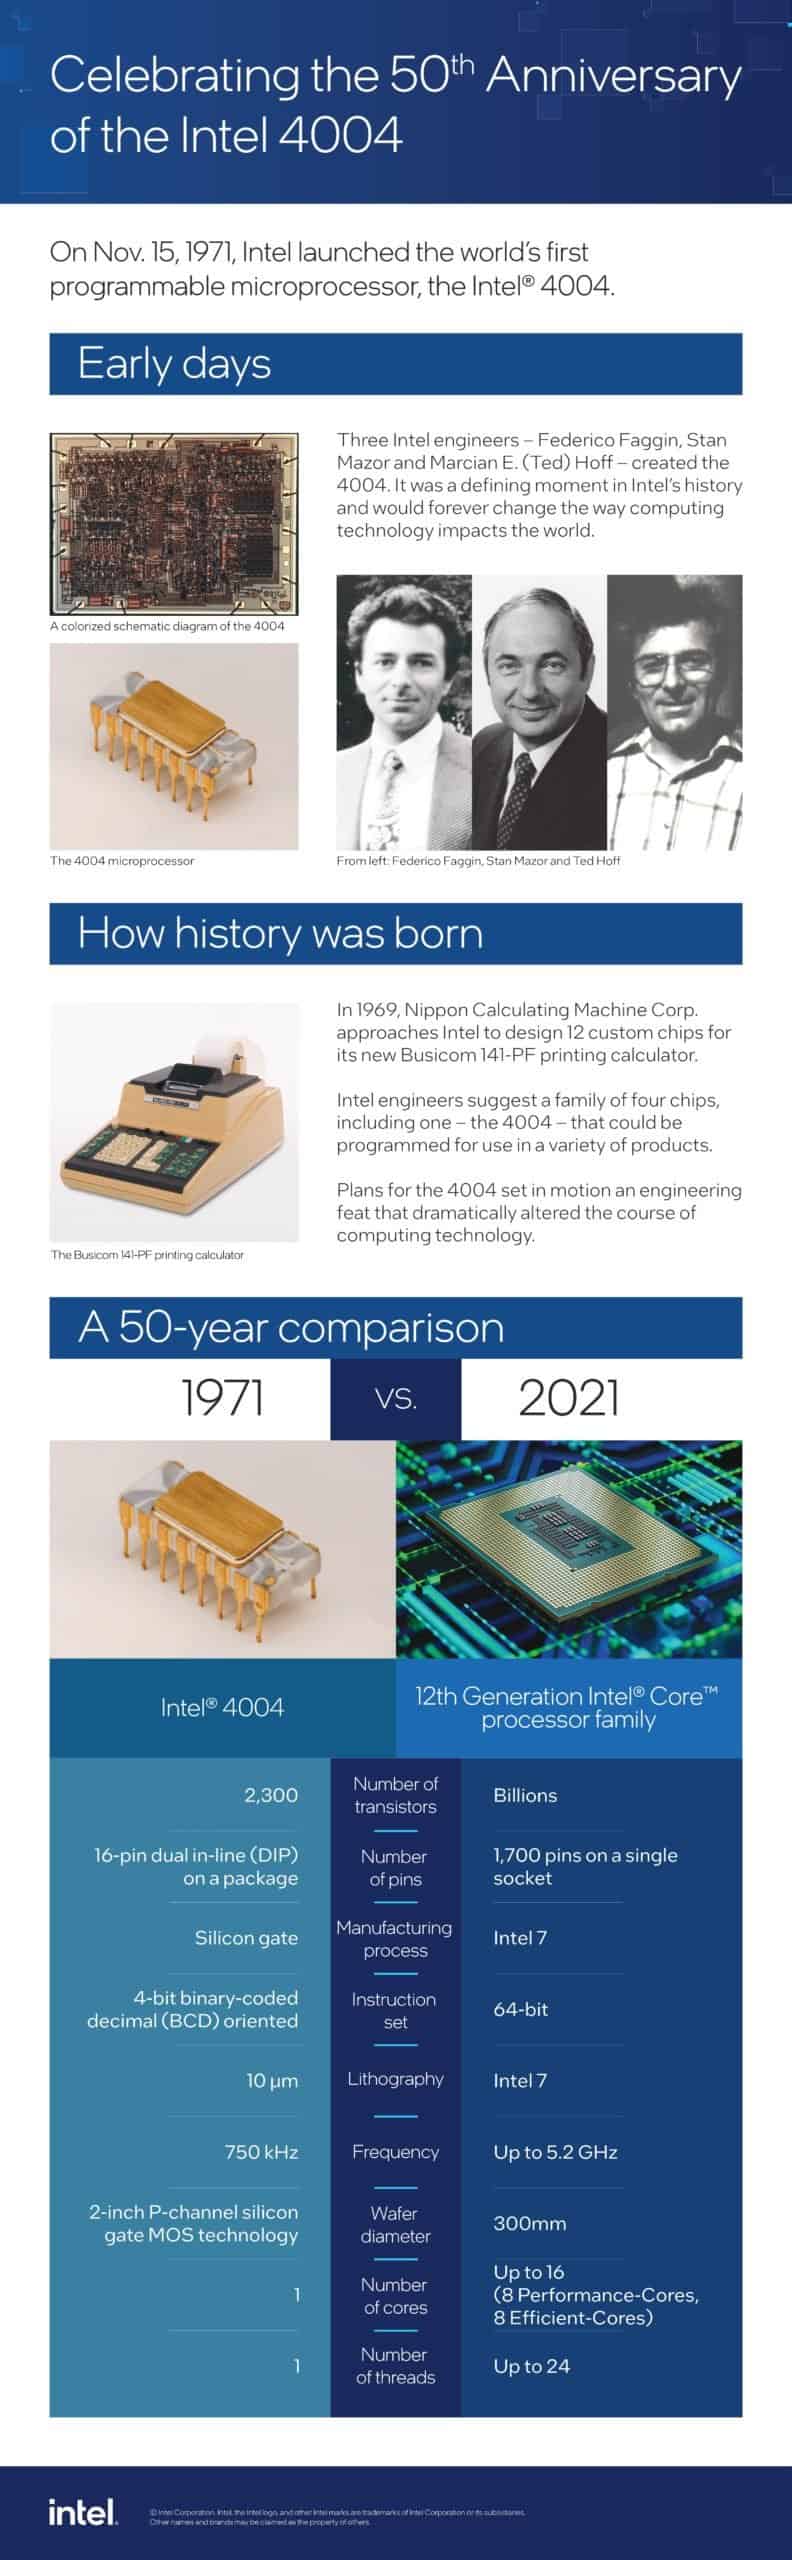 Intel 4004, the world’s first commercially available microprocessor, completes the 50th anniversary